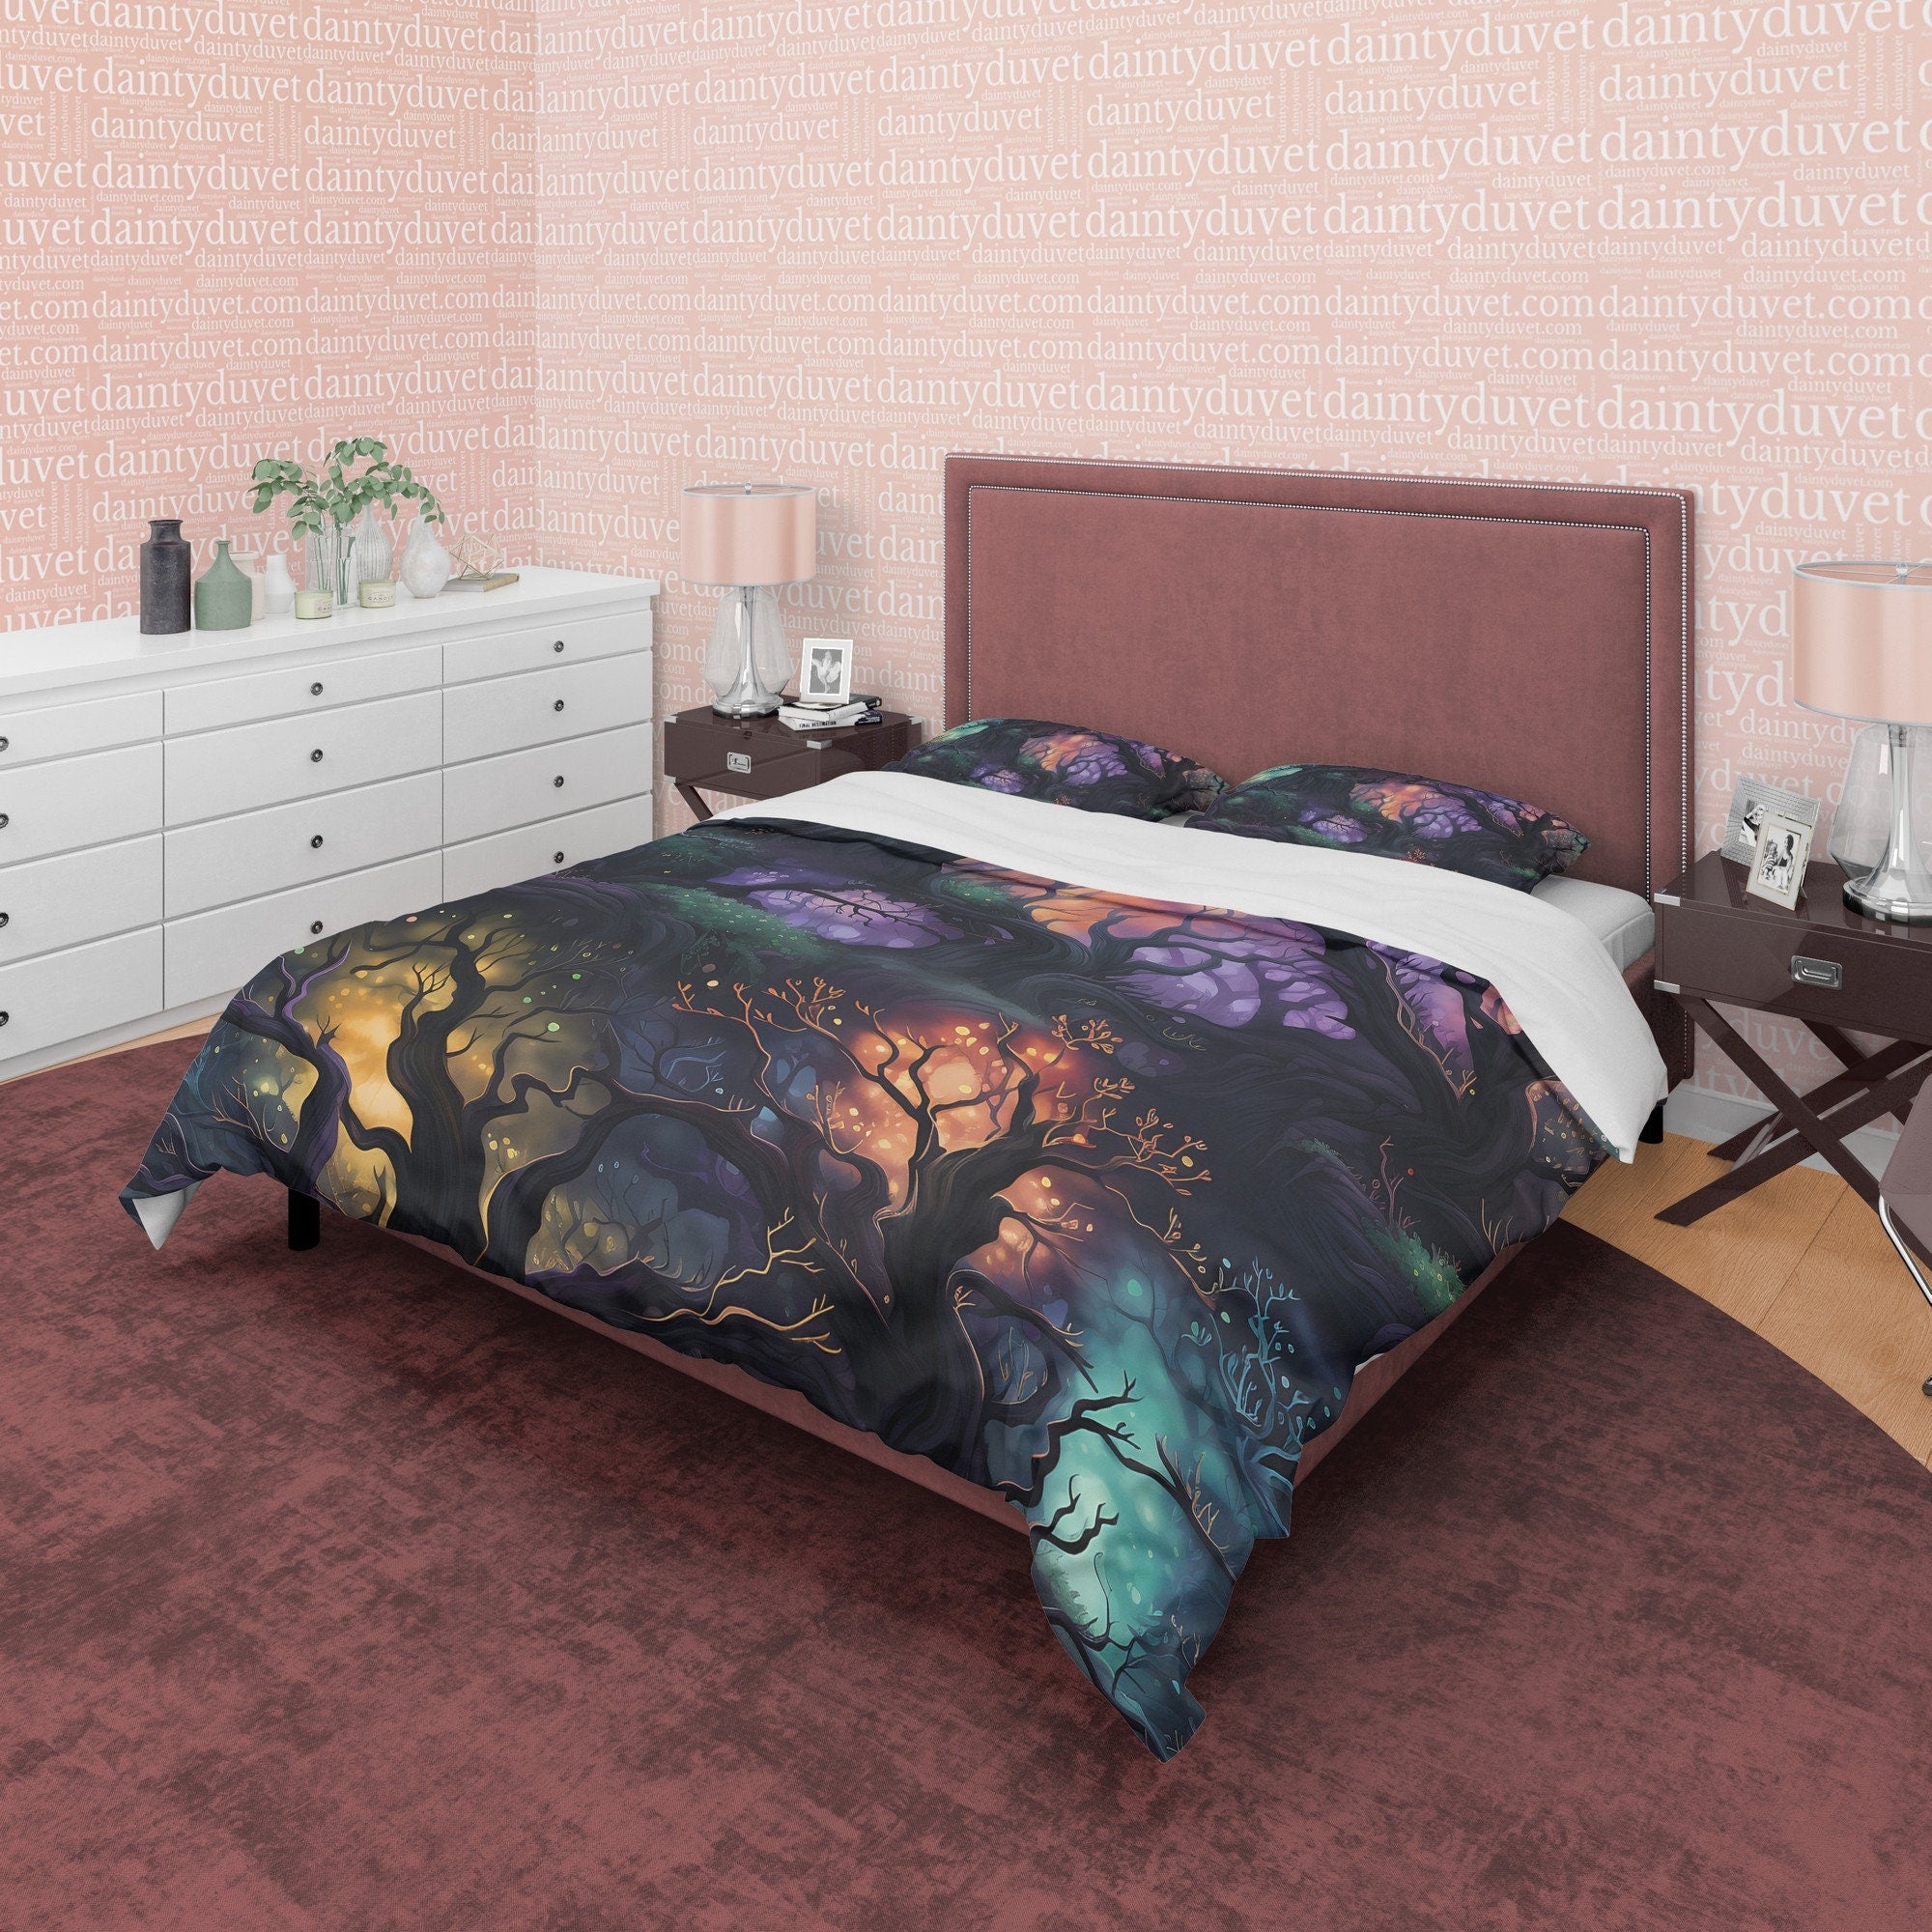 Enchanted Forest with Colorful Lights, Halloween Duvet Cover Set, Aesthetic Bedding, Spooky Room Decor, US, European, Australian Sizes